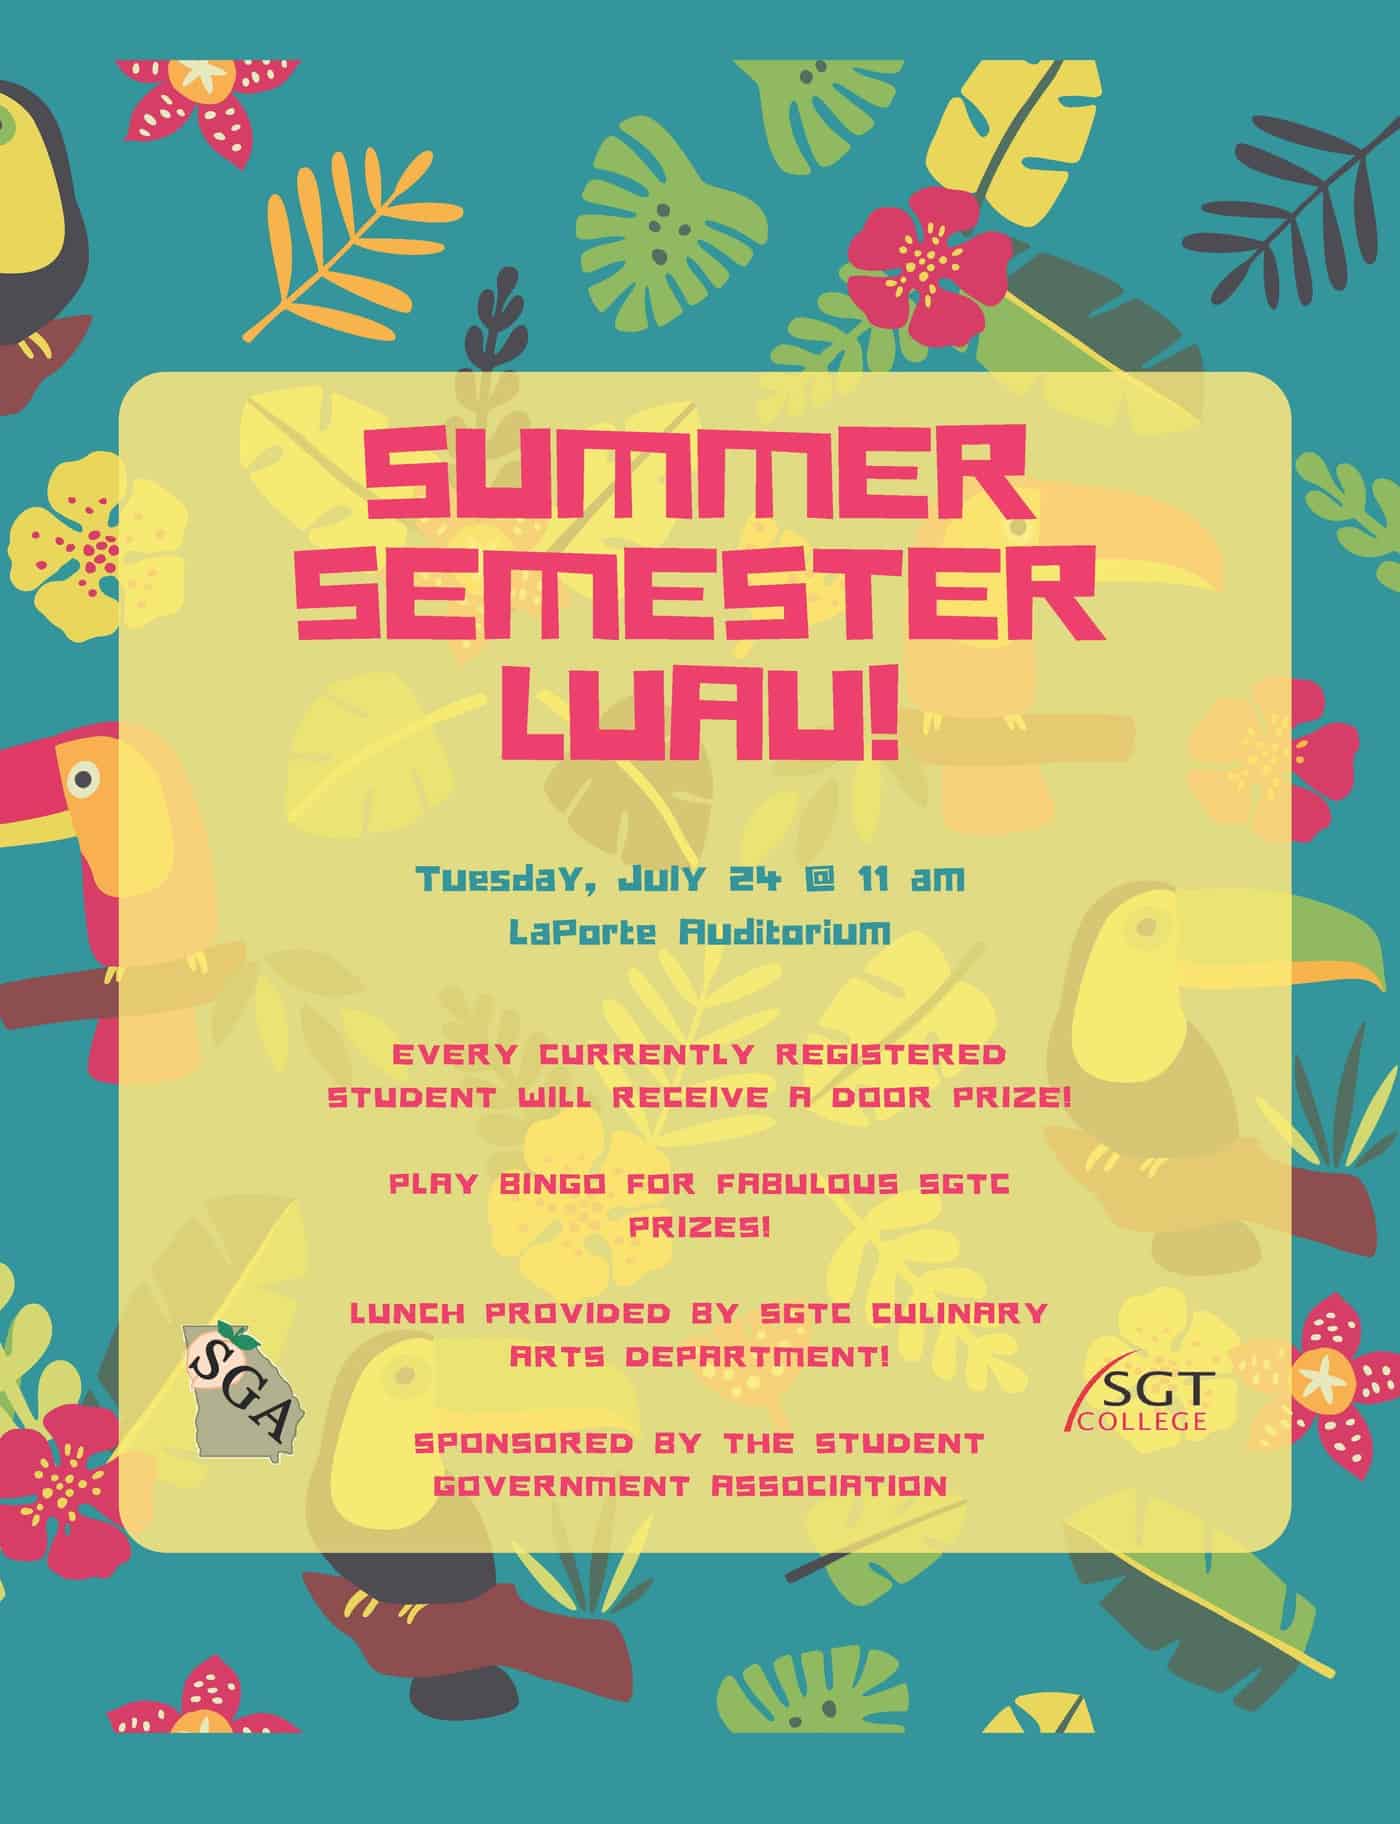 Flyer reads "Summer Semester Luau! Tuesday, July 24 @ 11 am LaPorte Auditorium Every currently registered student will receive a door prize! Play Bingo for fabulous sgtc prizes! Lunch provided by SGTC Culinary Arts program! Sponsored by the student government association"